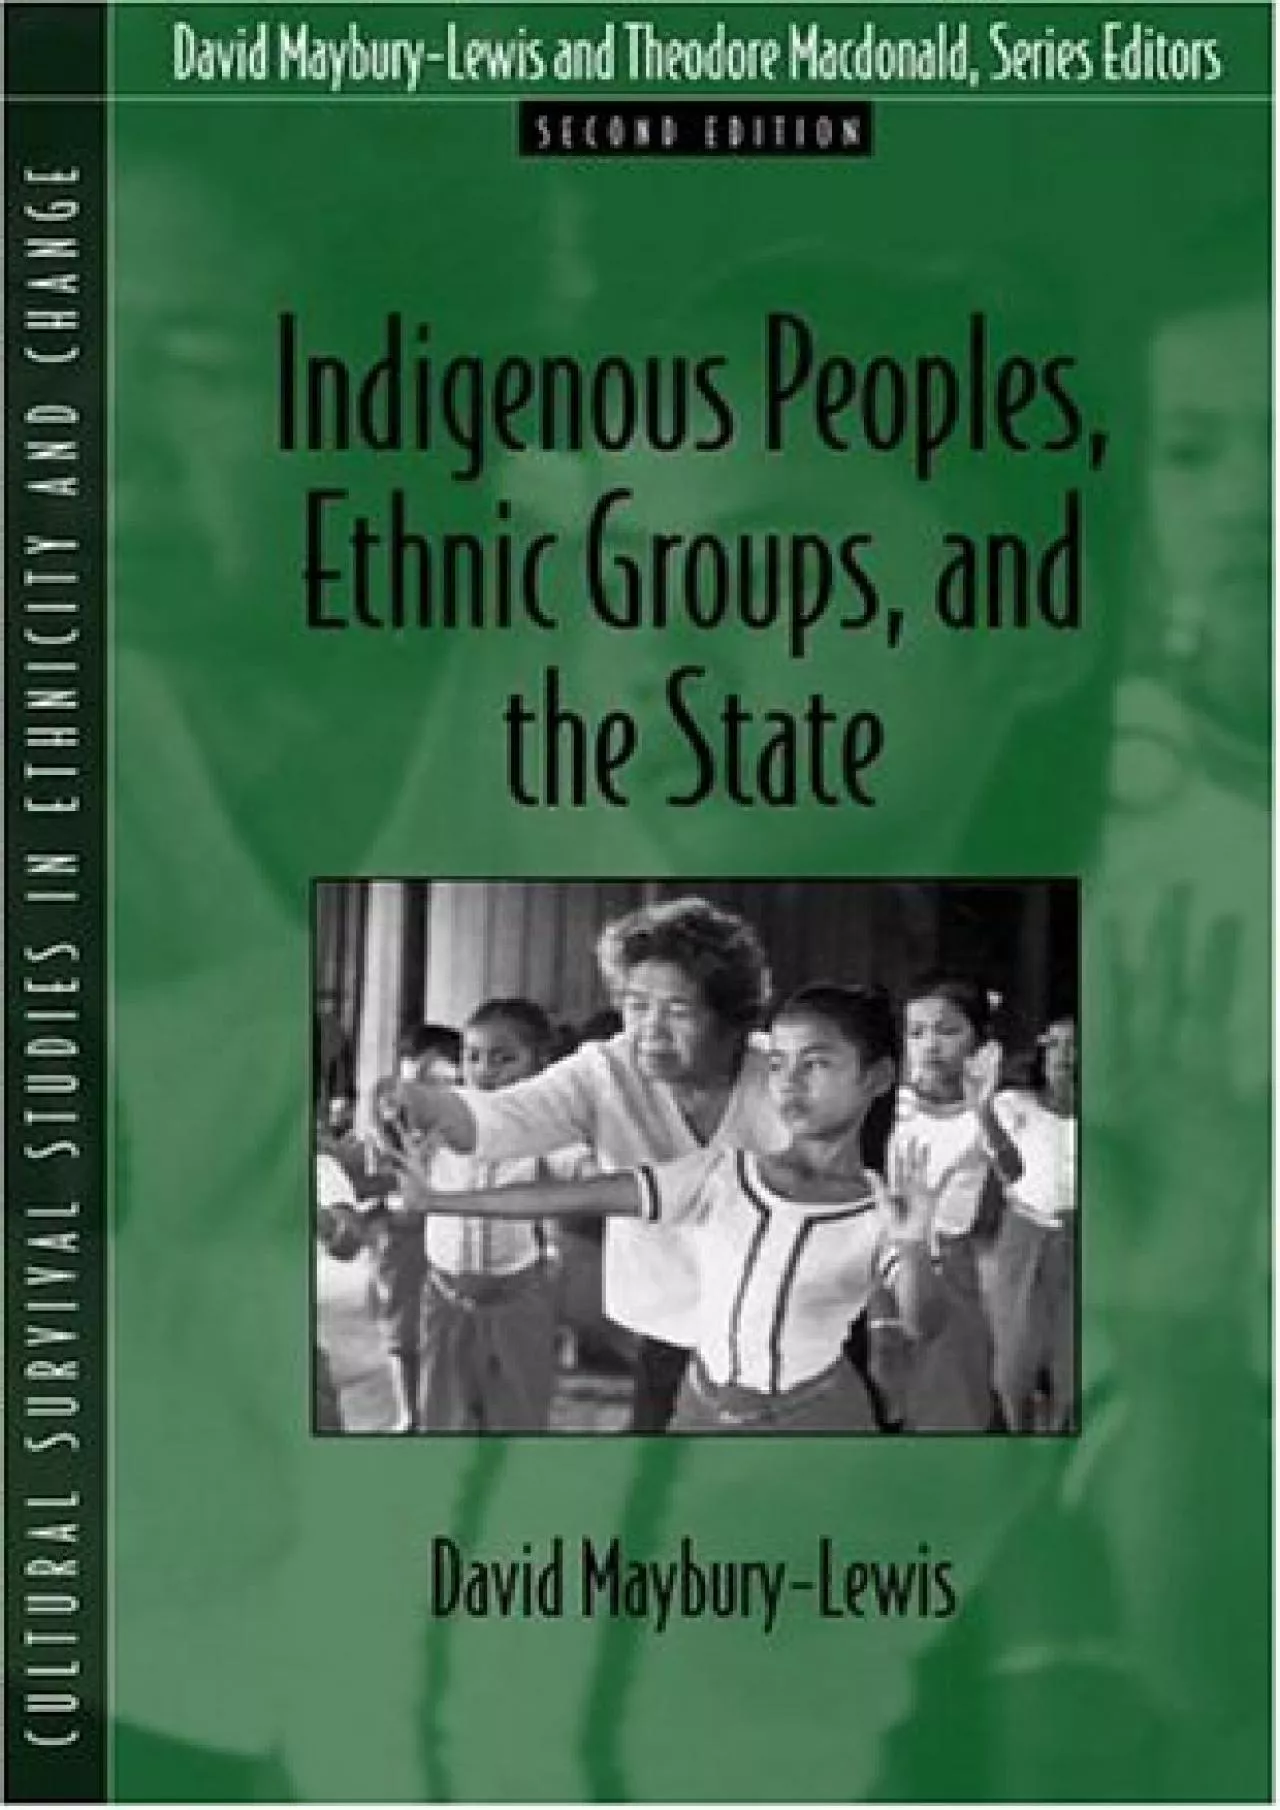 (BOOK)-Indigenous Peoples, Ethnic Groups, and the State (2nd Edition)